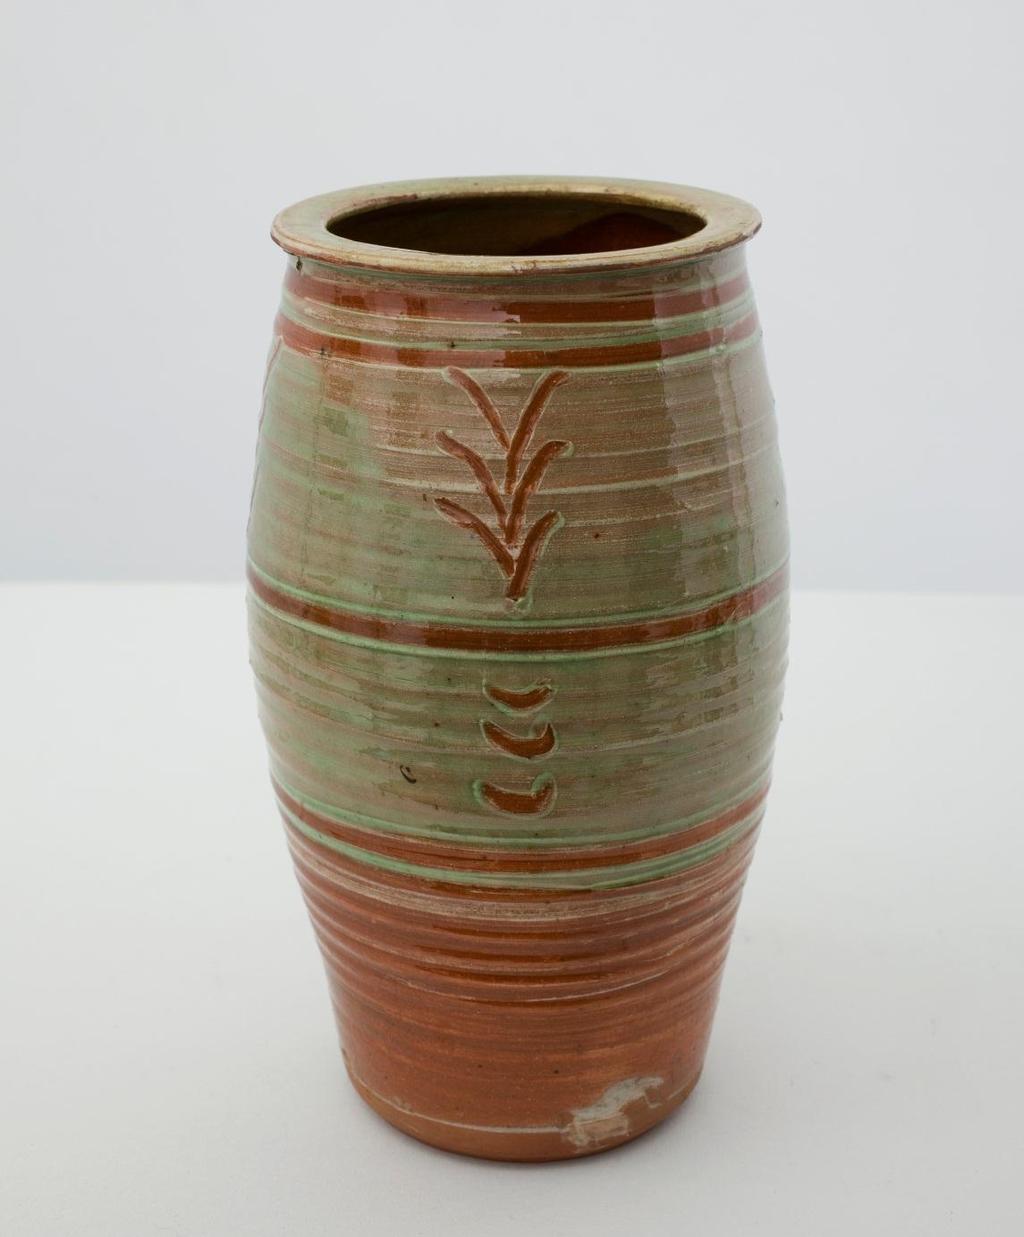 Sidney Tustin Vase 1927-78 Ovoid form with green and